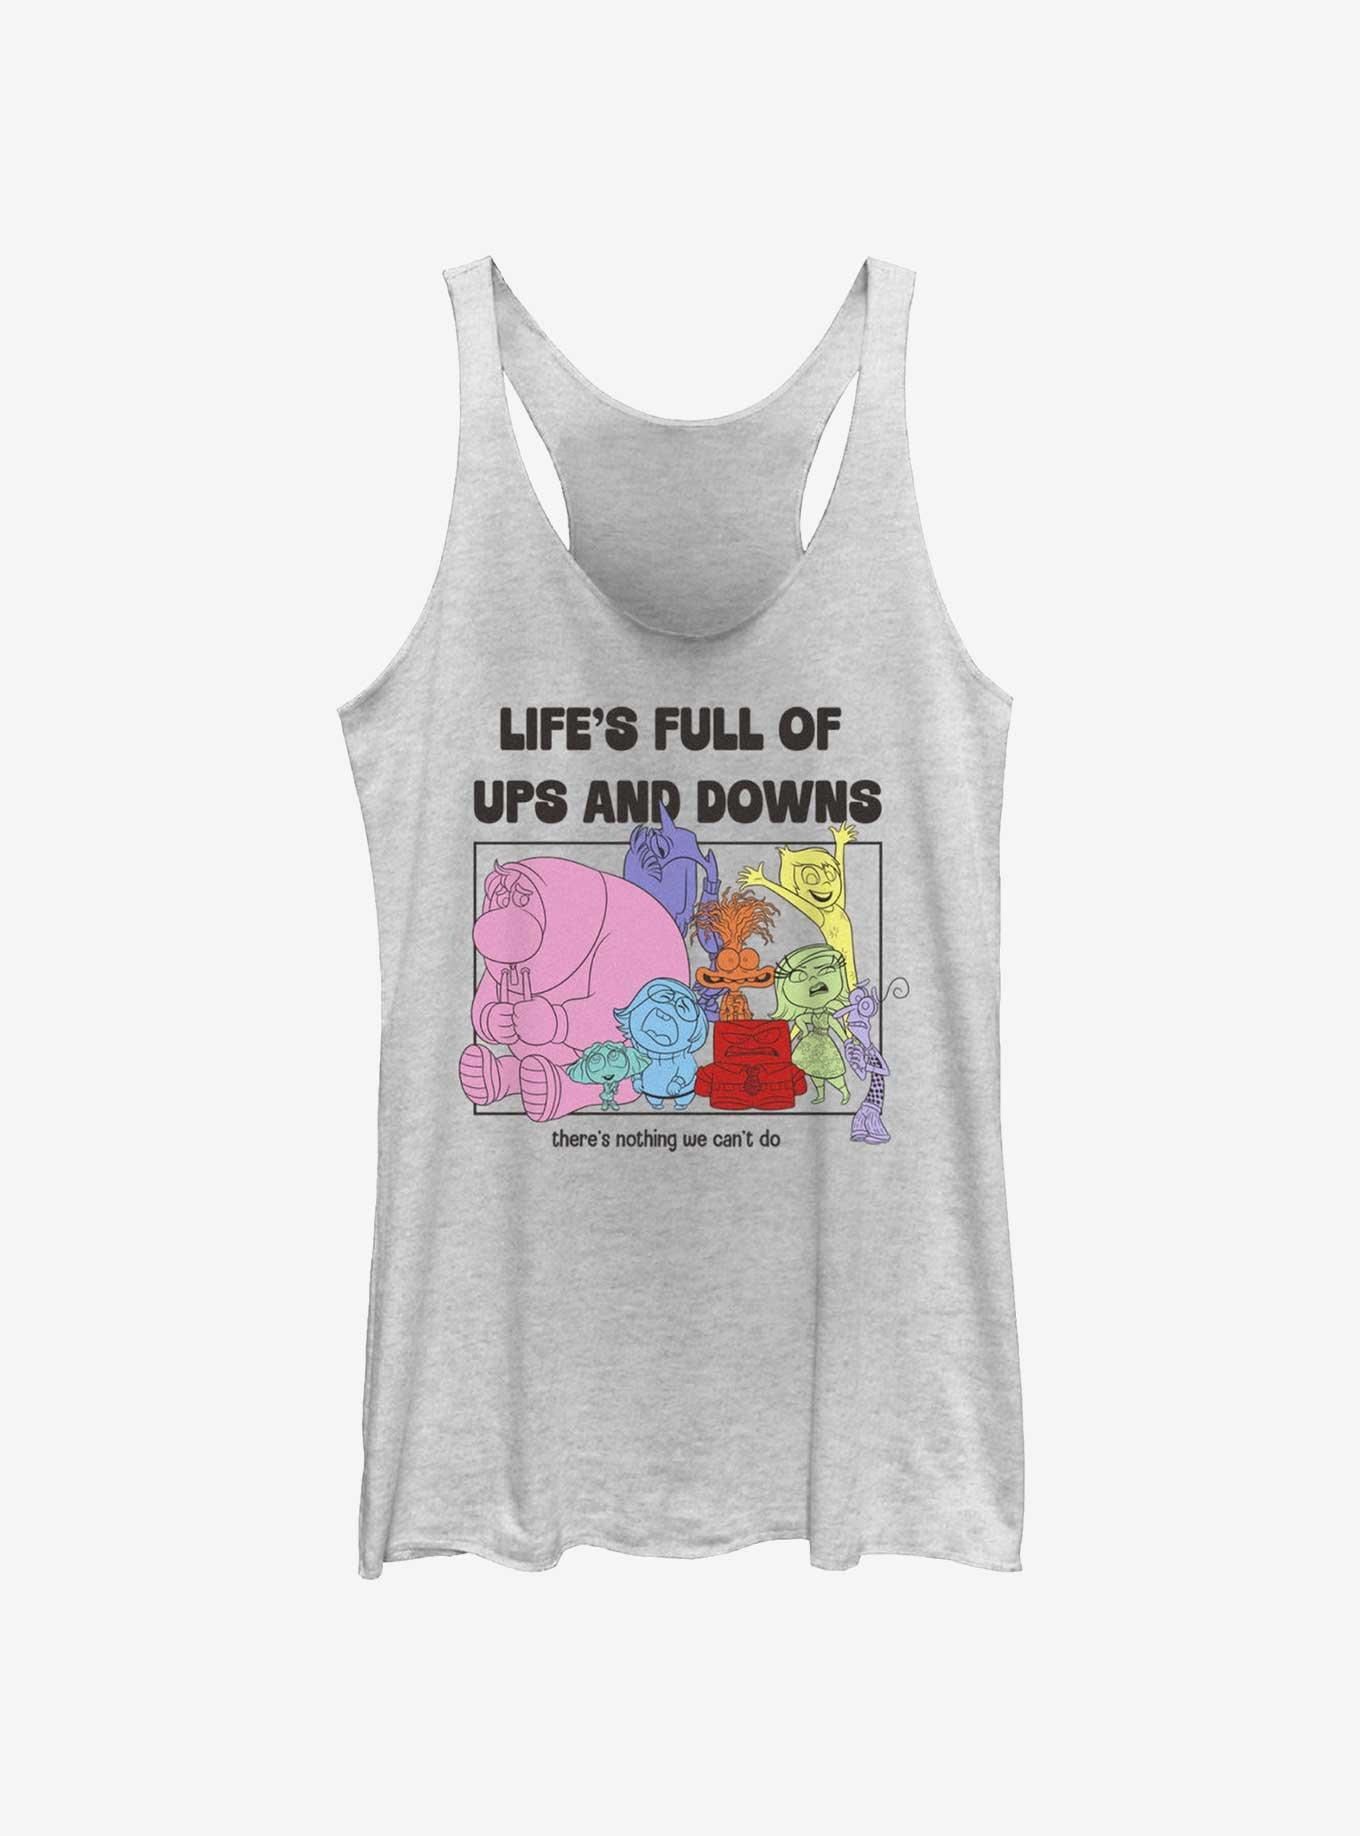 Disney Pixar Inside Out 2 Life's Full Of Ups And Downs Girls Tank, WHITE HTR, hi-res